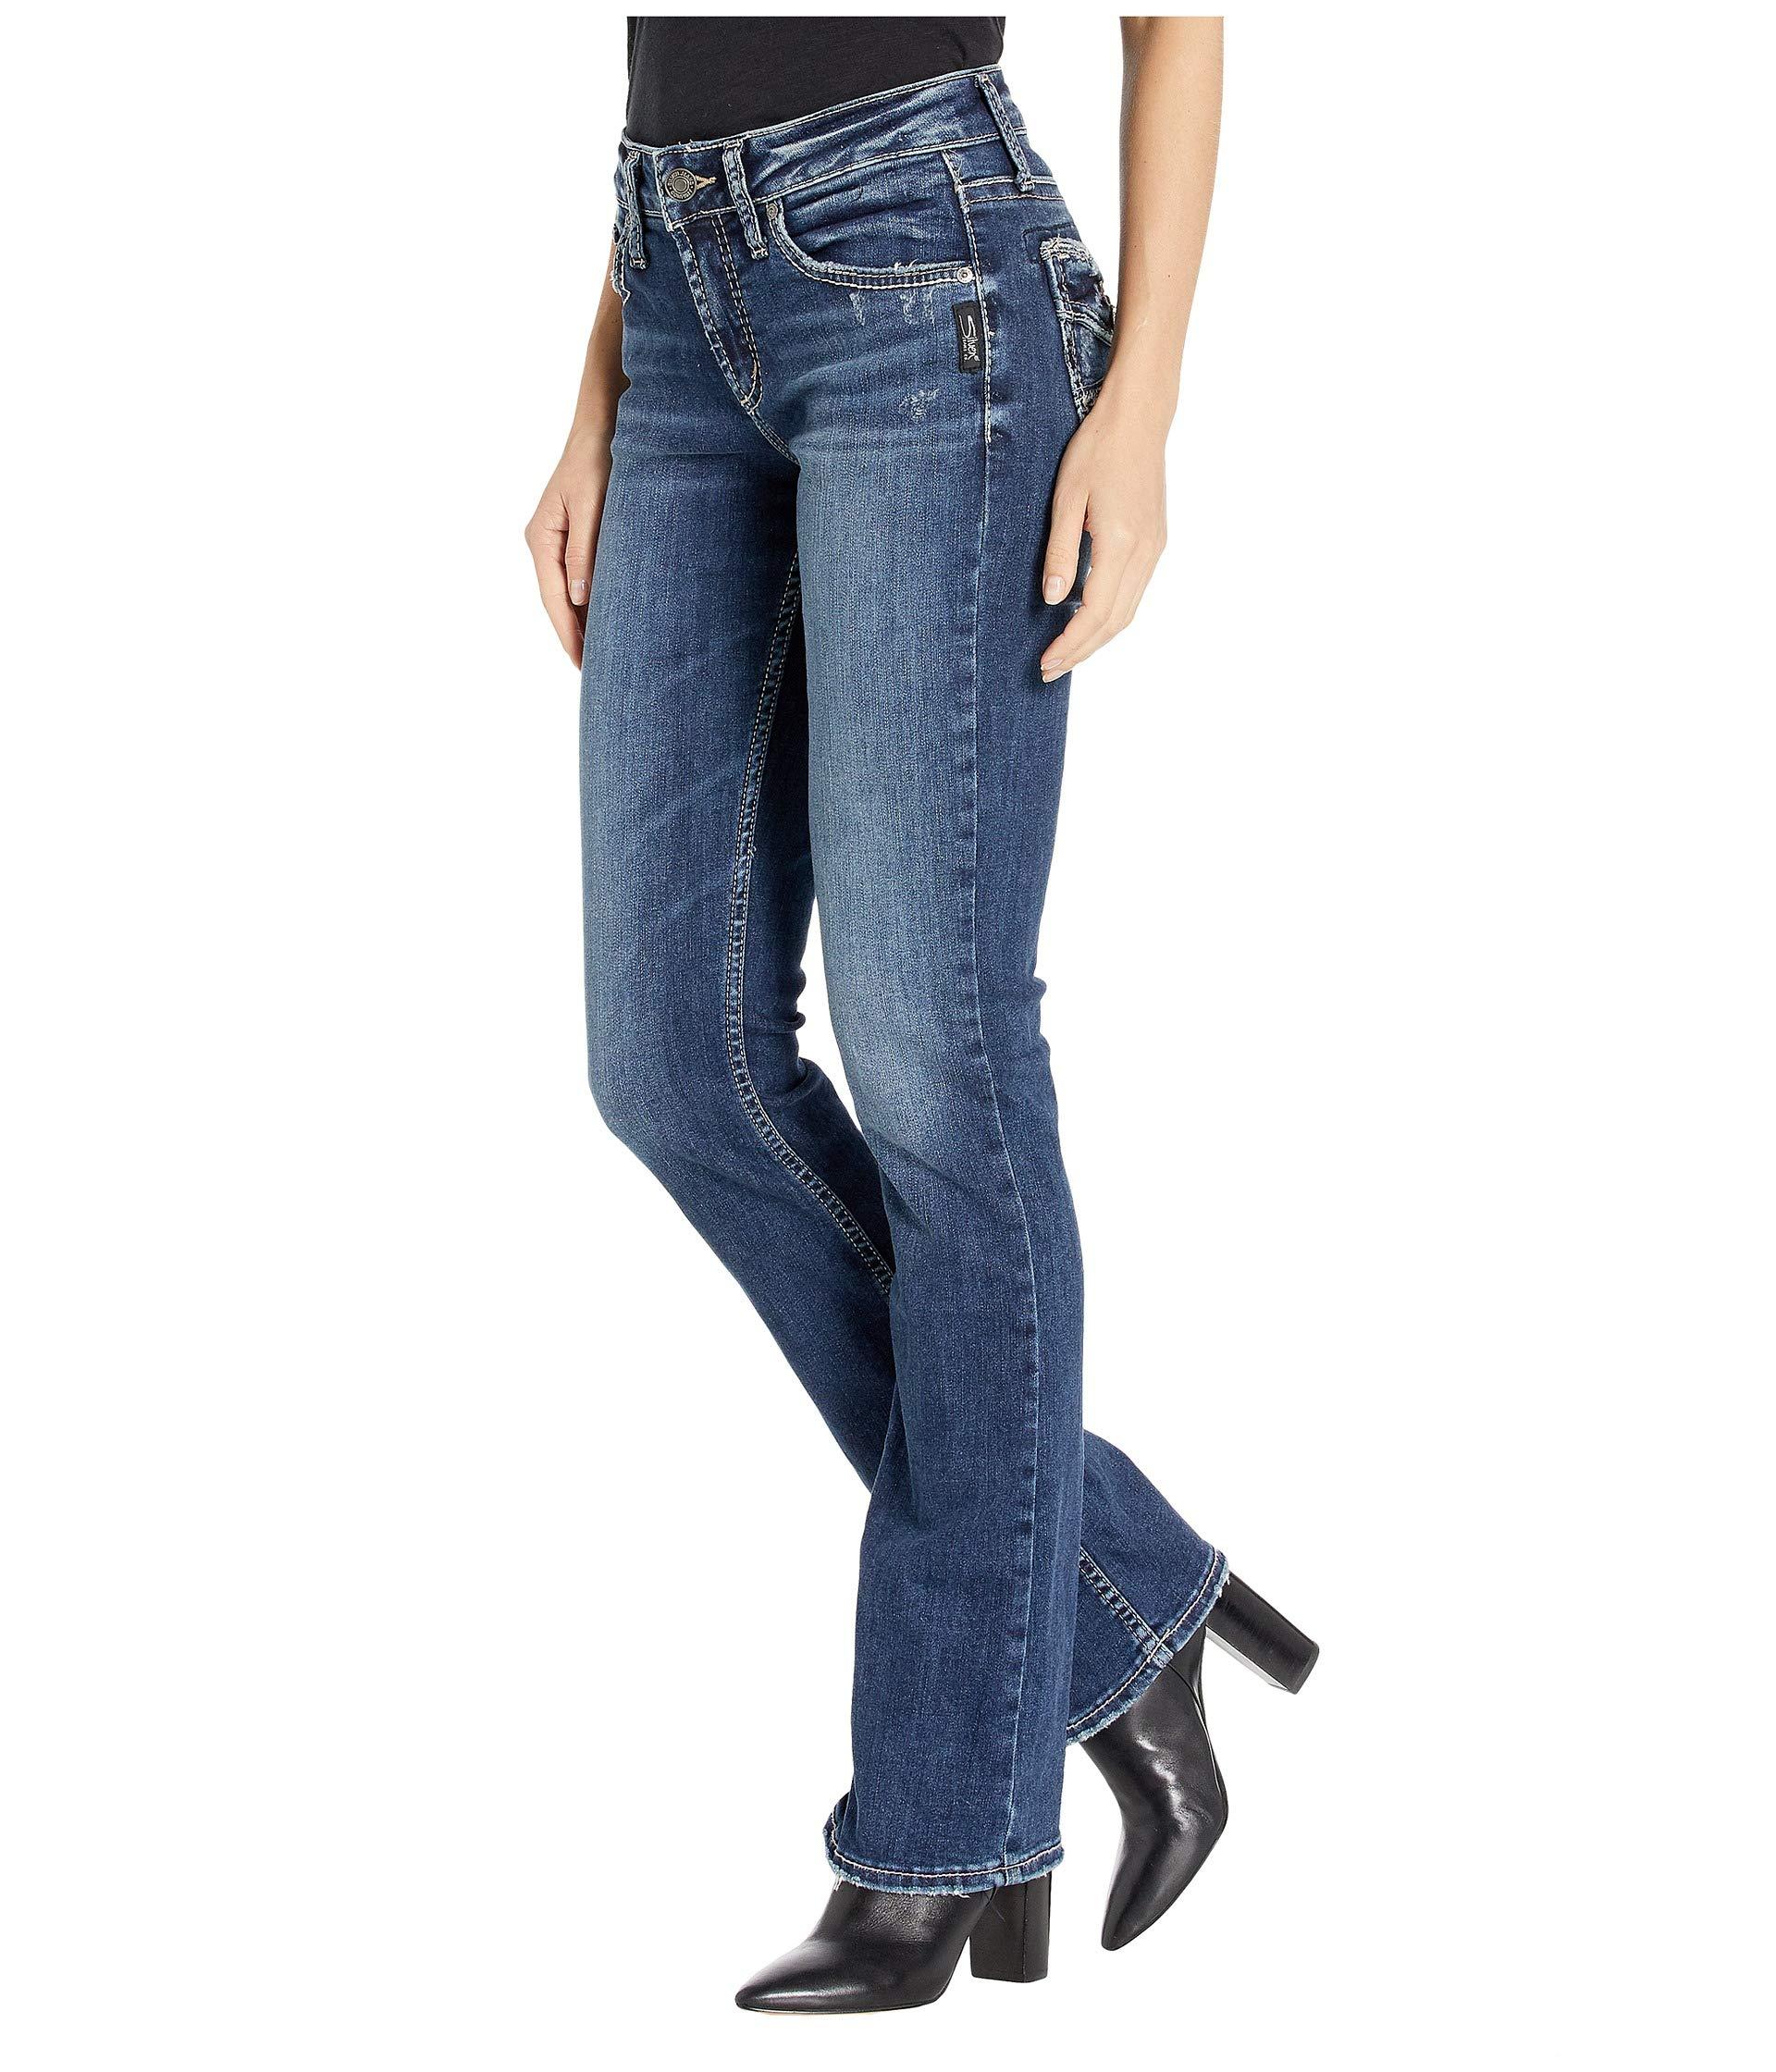 Silver Jeans Co. Denim Avery High-rise Curvy Fit Slim Bootcut 